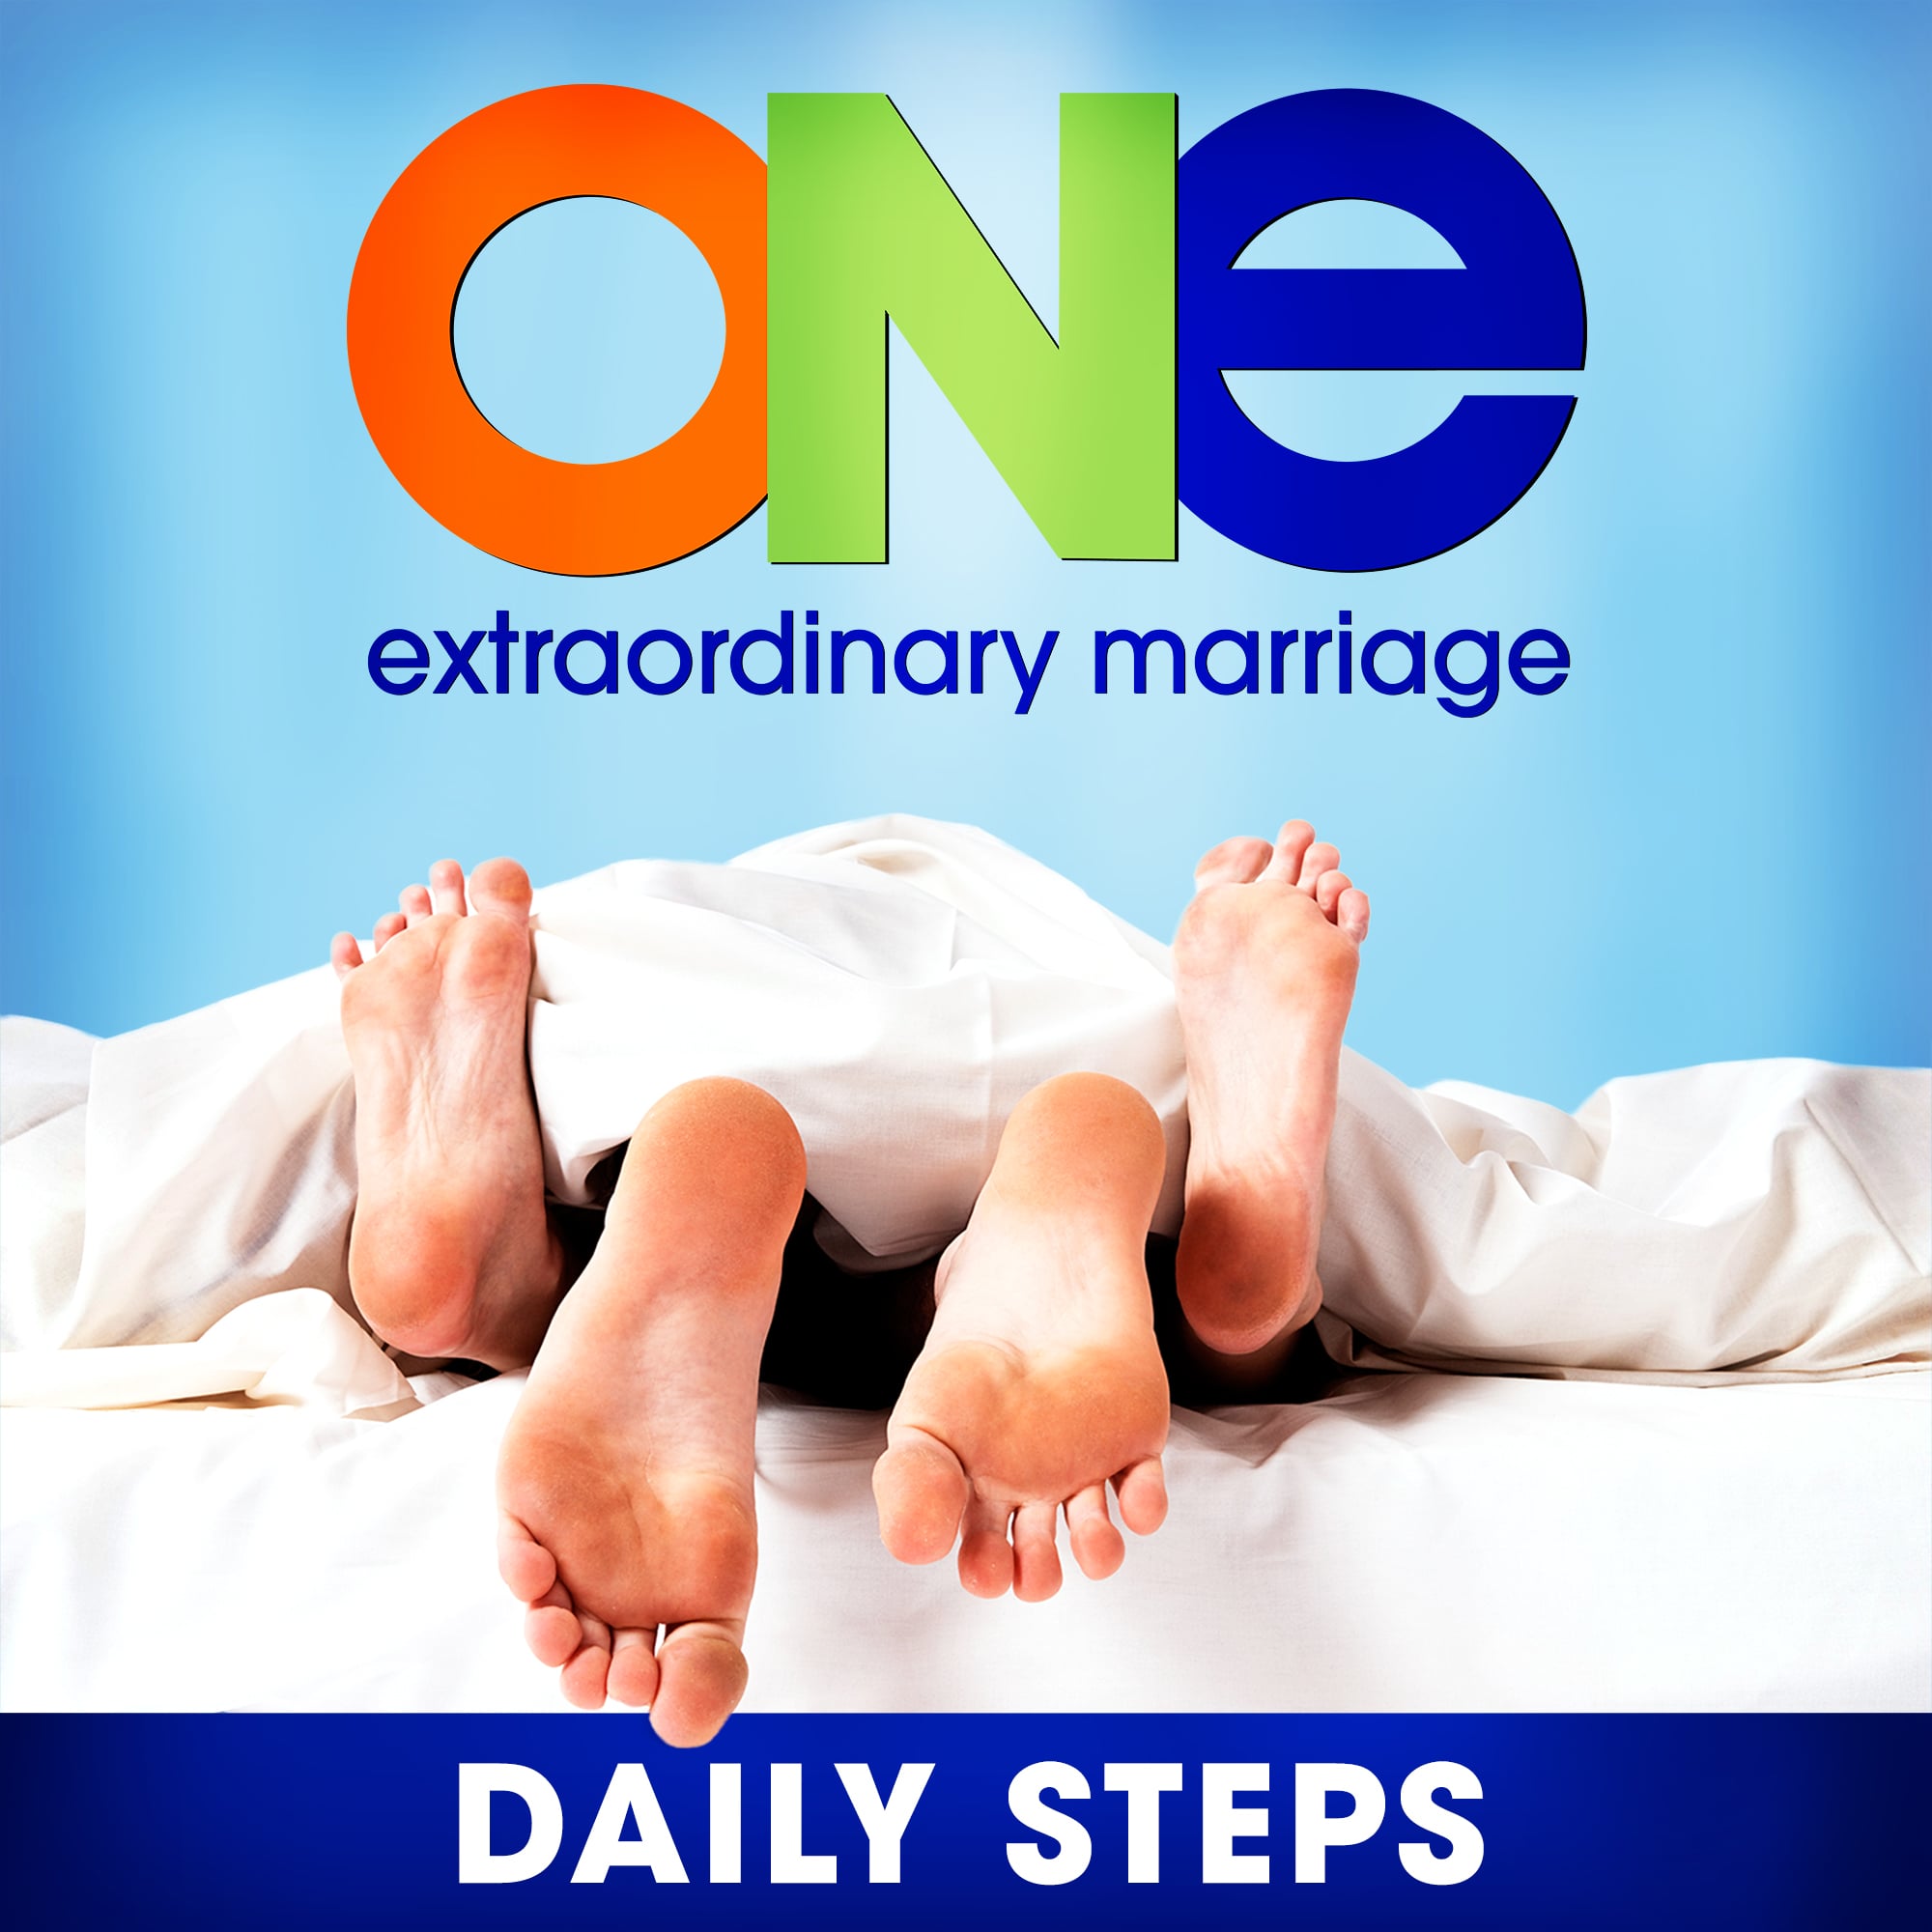 DS 002: What Are the 5 Rules to Create an Extraordinary Marriage?